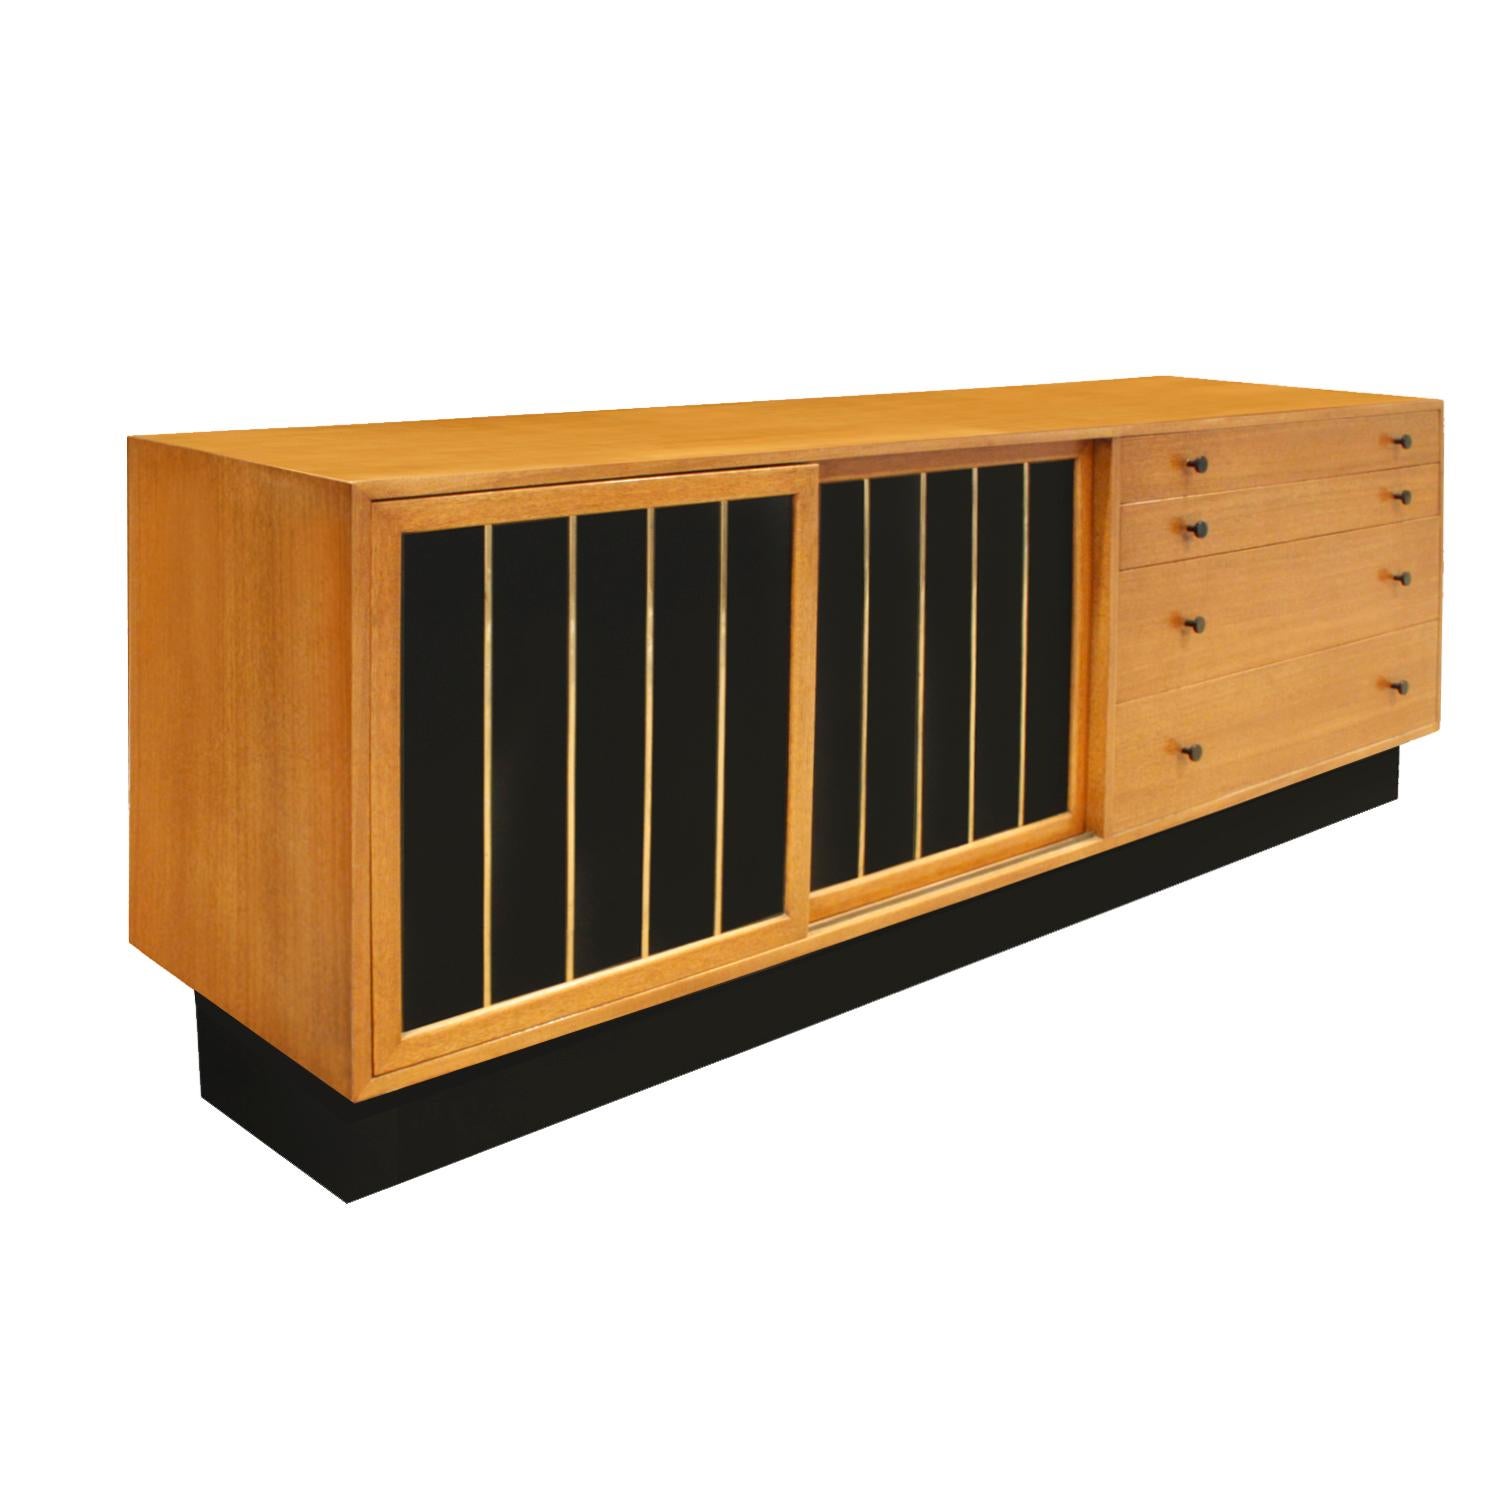 Mid-Century Modern Harvey Probber Credenza in Mahogany with Black Leather, 1950s ‘Signed’